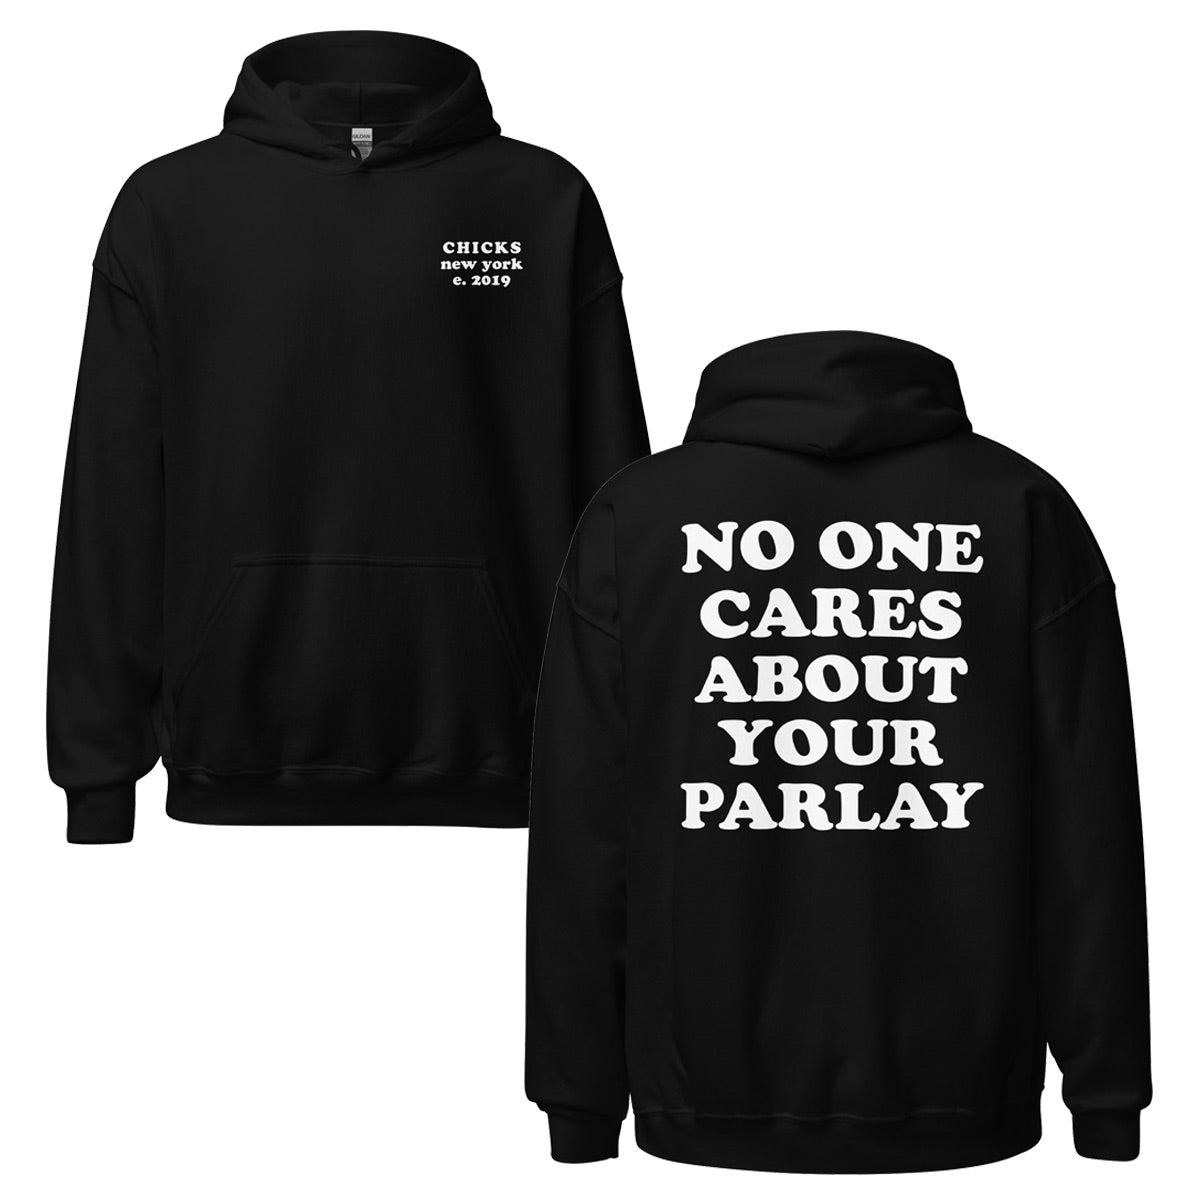 No One Cares About Your Parlay Hoodie-Hoodies & Sweatshirts-CHICKS-Barstool Sports